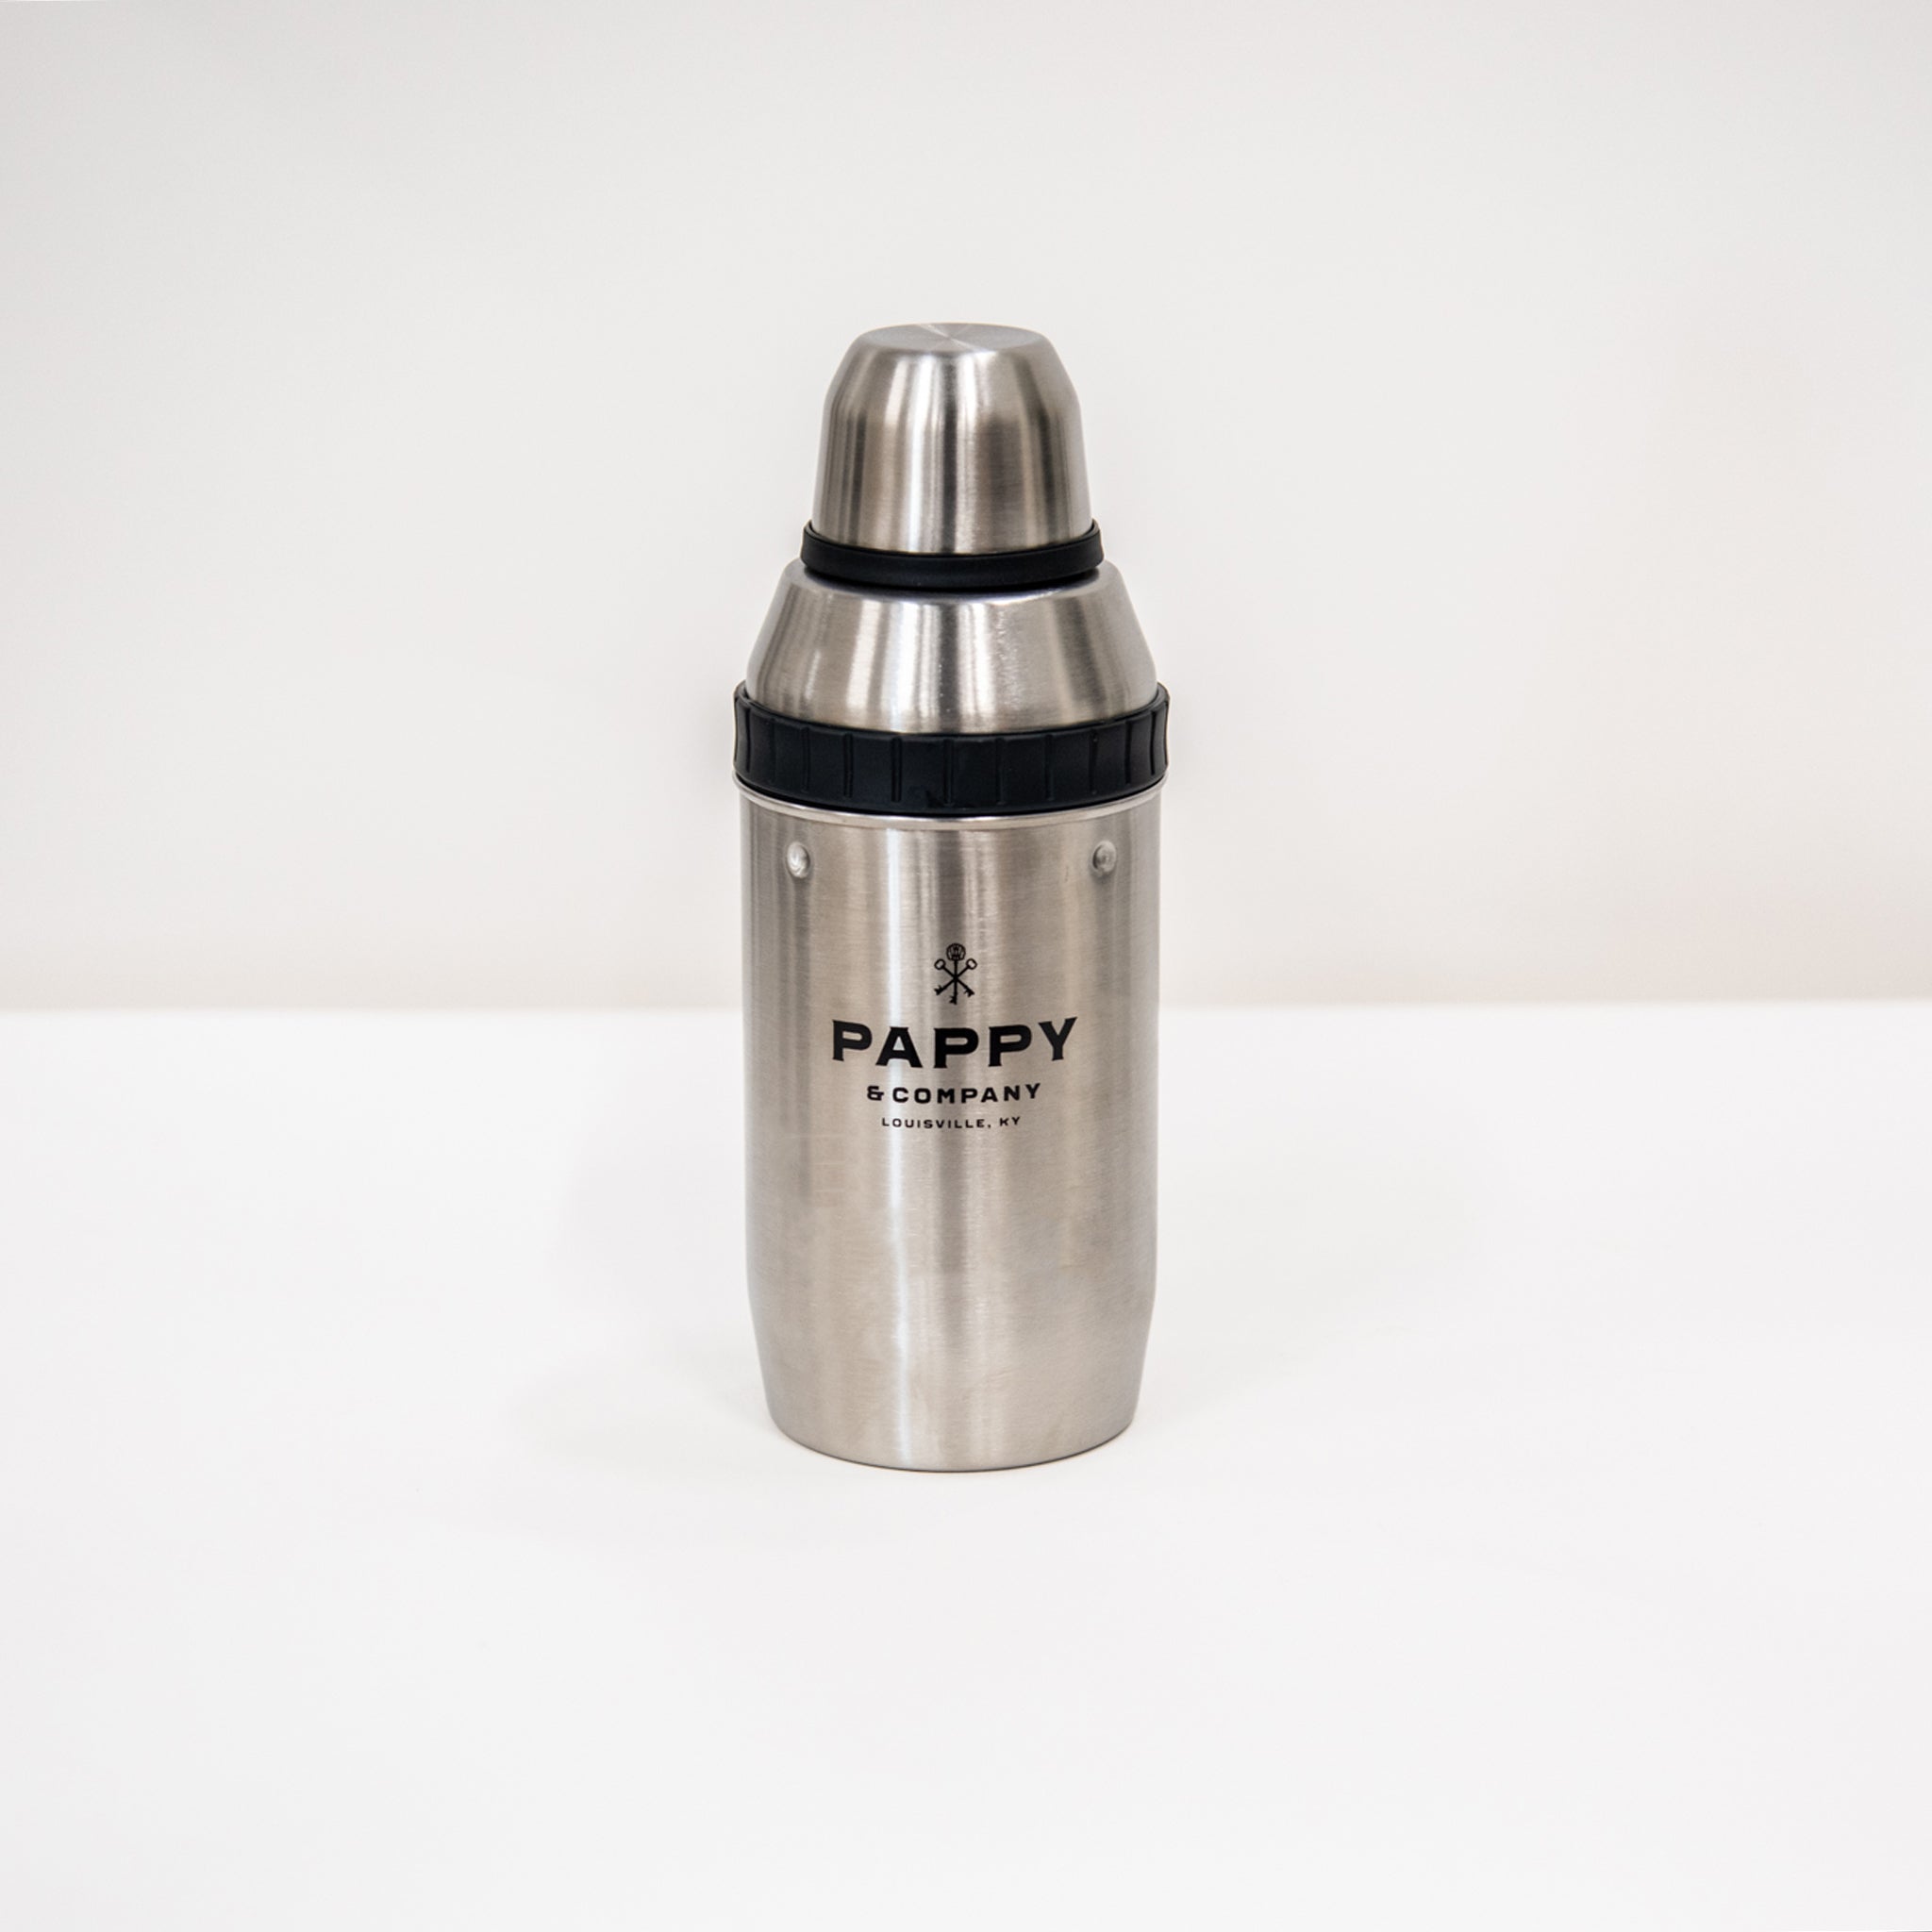 59 Best stanley thermos ideas  stanley thermos, thermos, stanley